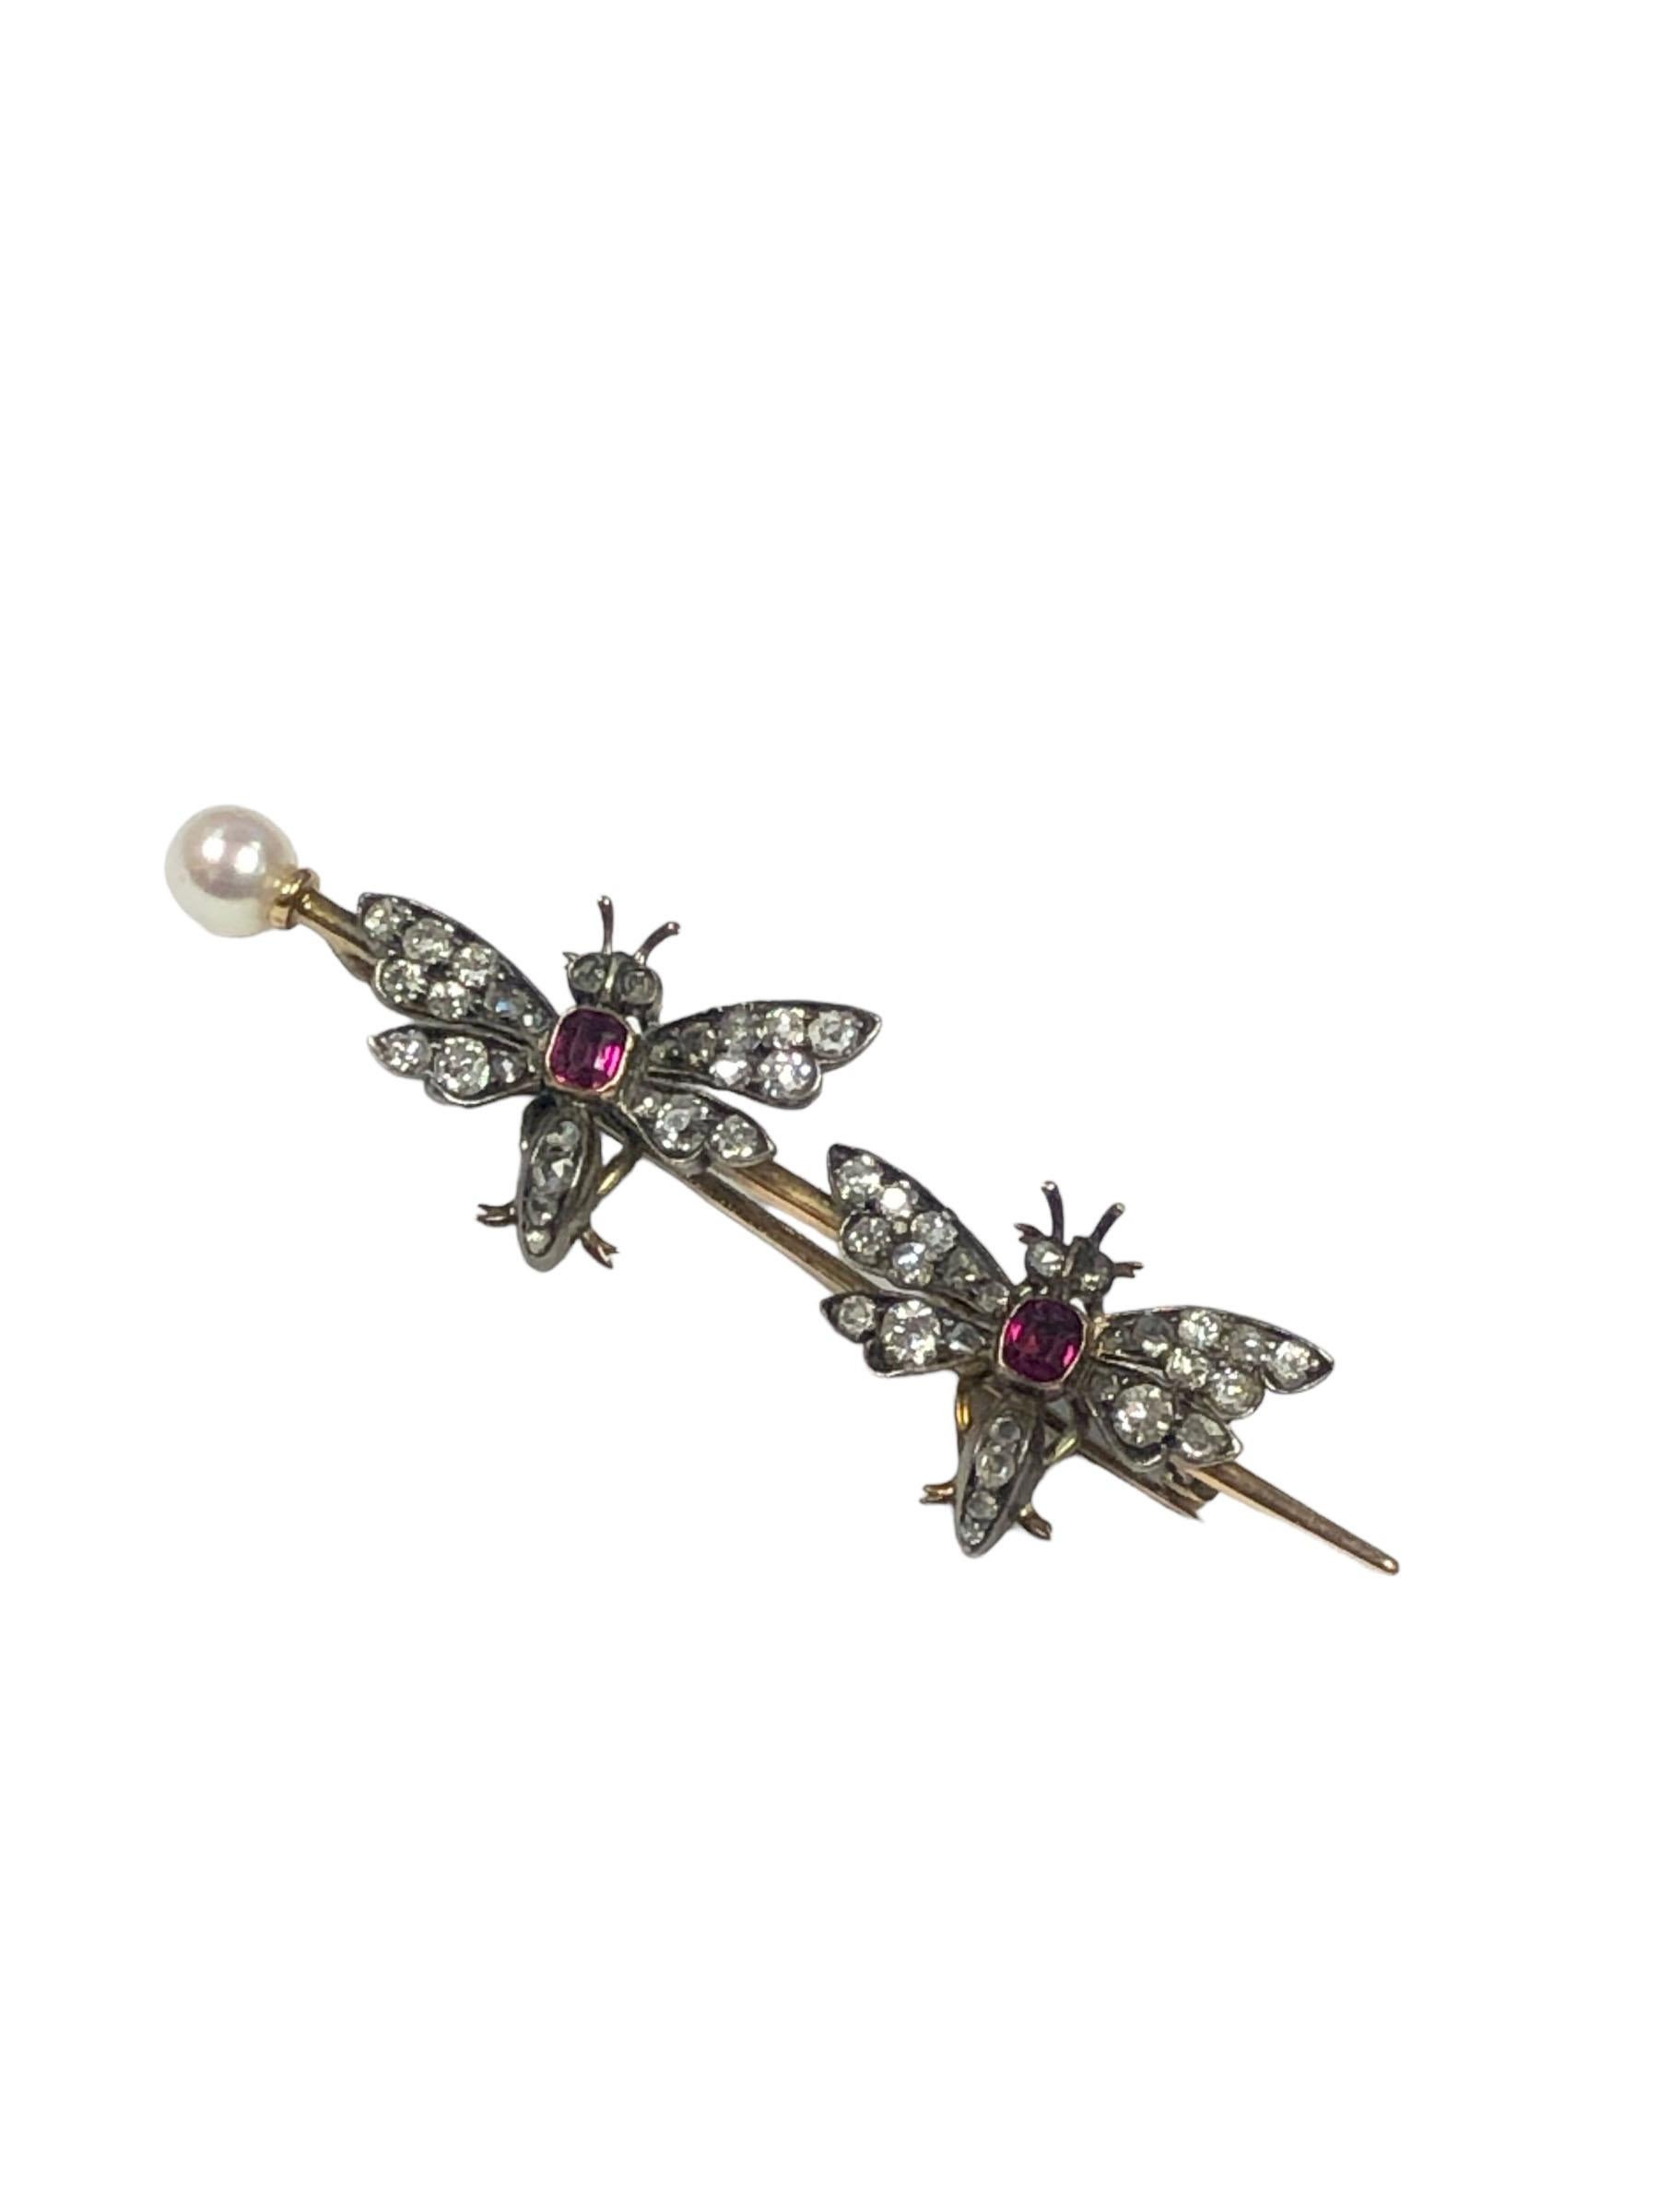 Circa 1900 Tiffany & Company Double Butterfly Brooch, measuring 2 1/4 inches in length.  Silver top and 14k Gold back, set with old Mine and Rose cut Diamonds totaling approximately .60 Carats, further set with Fine color old cut Cushion Rubies and